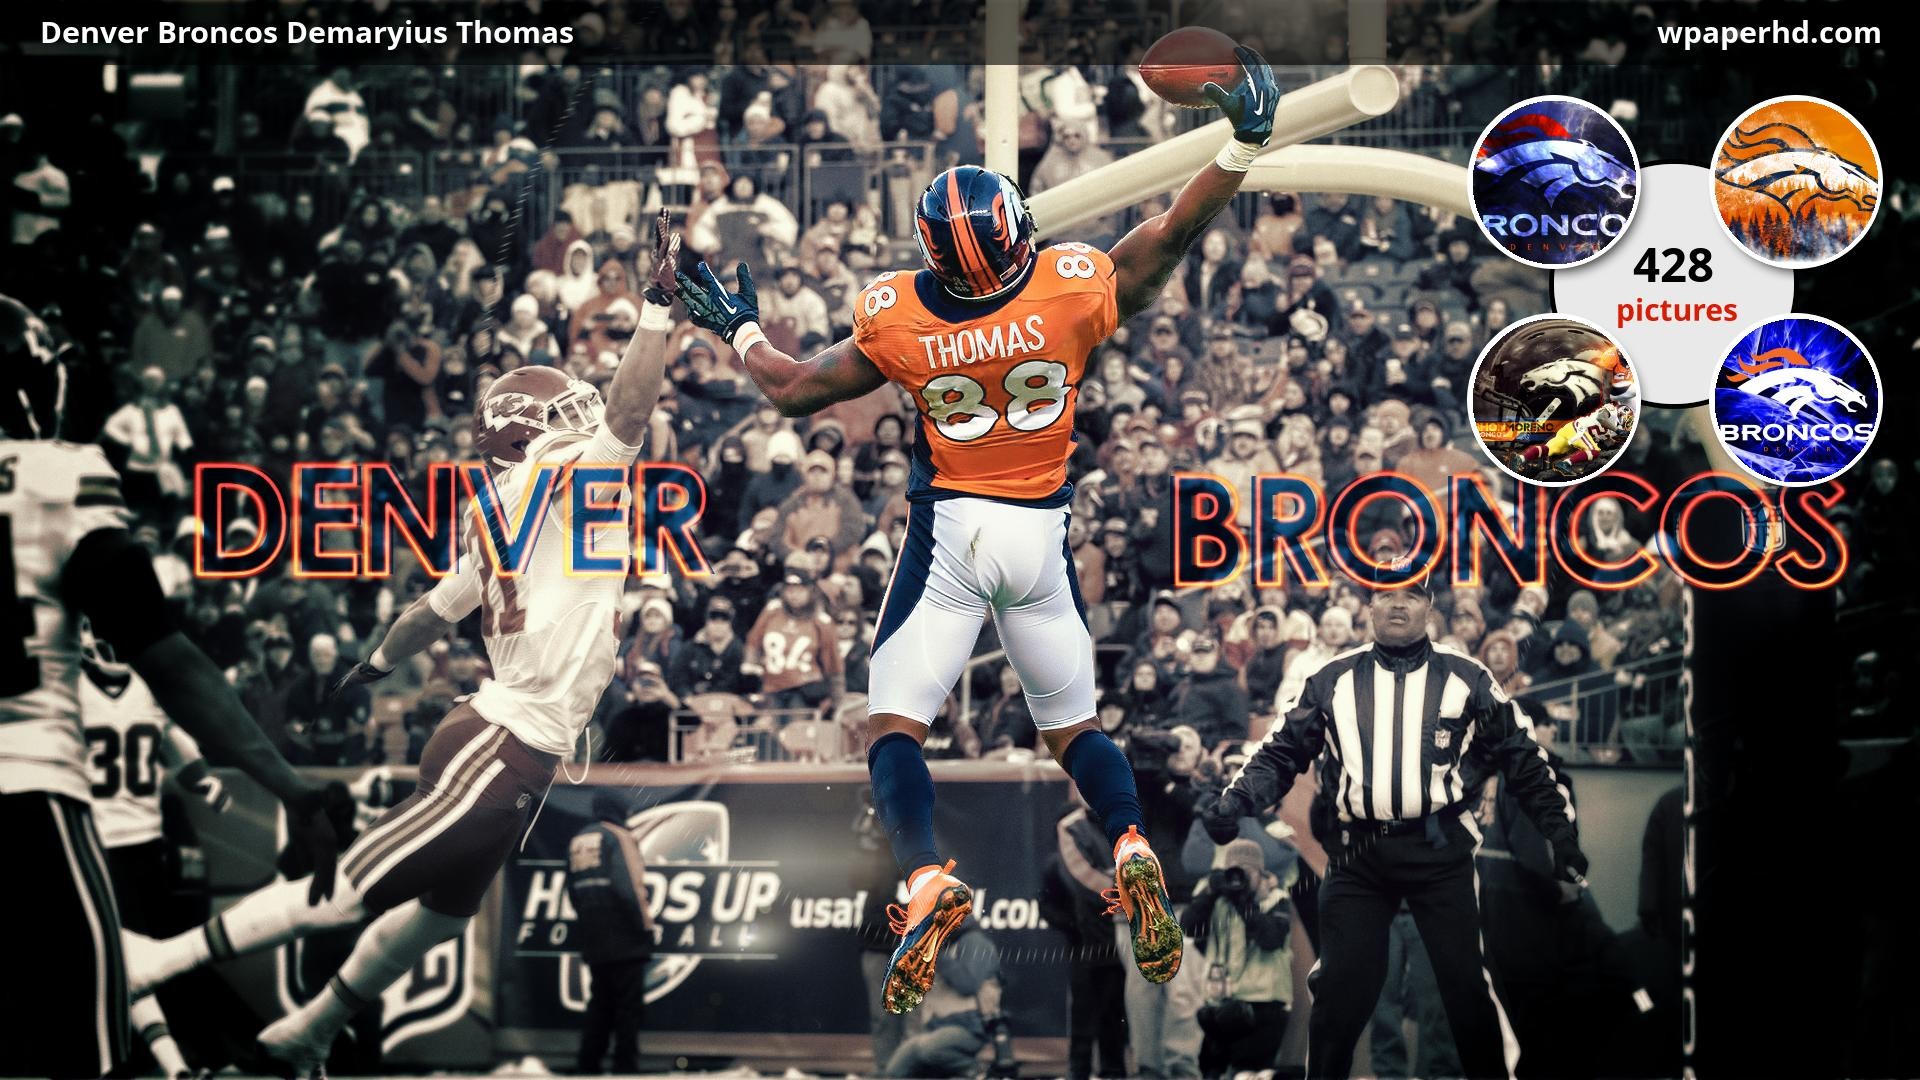 1920x1080 You are on page with Denver Broncos Demaryius Thomas wallpaper, where you  can download this picture in Original size and ...